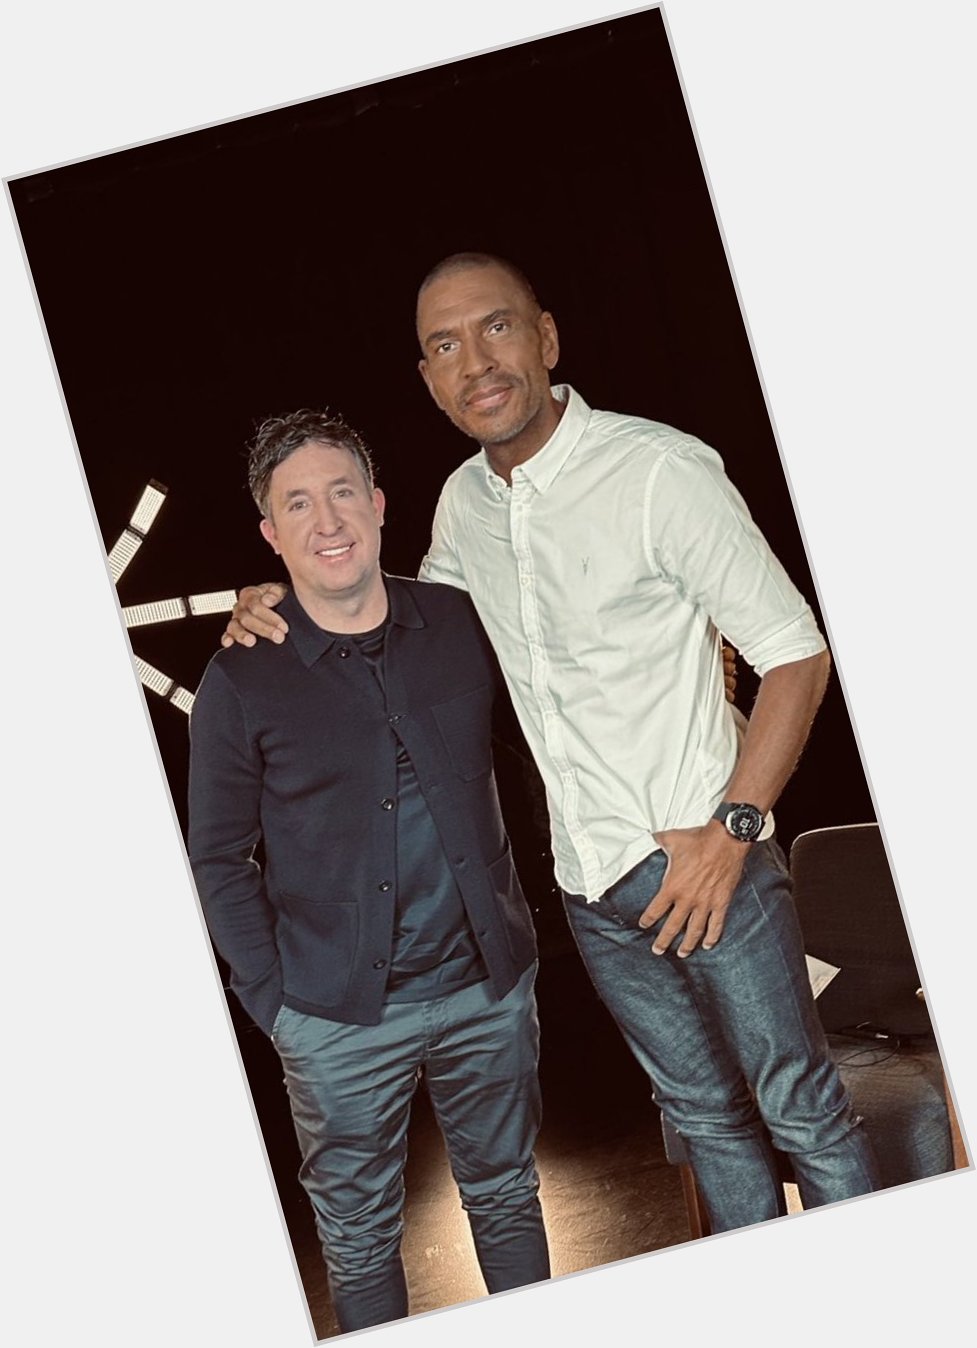 Big Happy Birthday to here s a recent pic of him with Robbie Fowler 